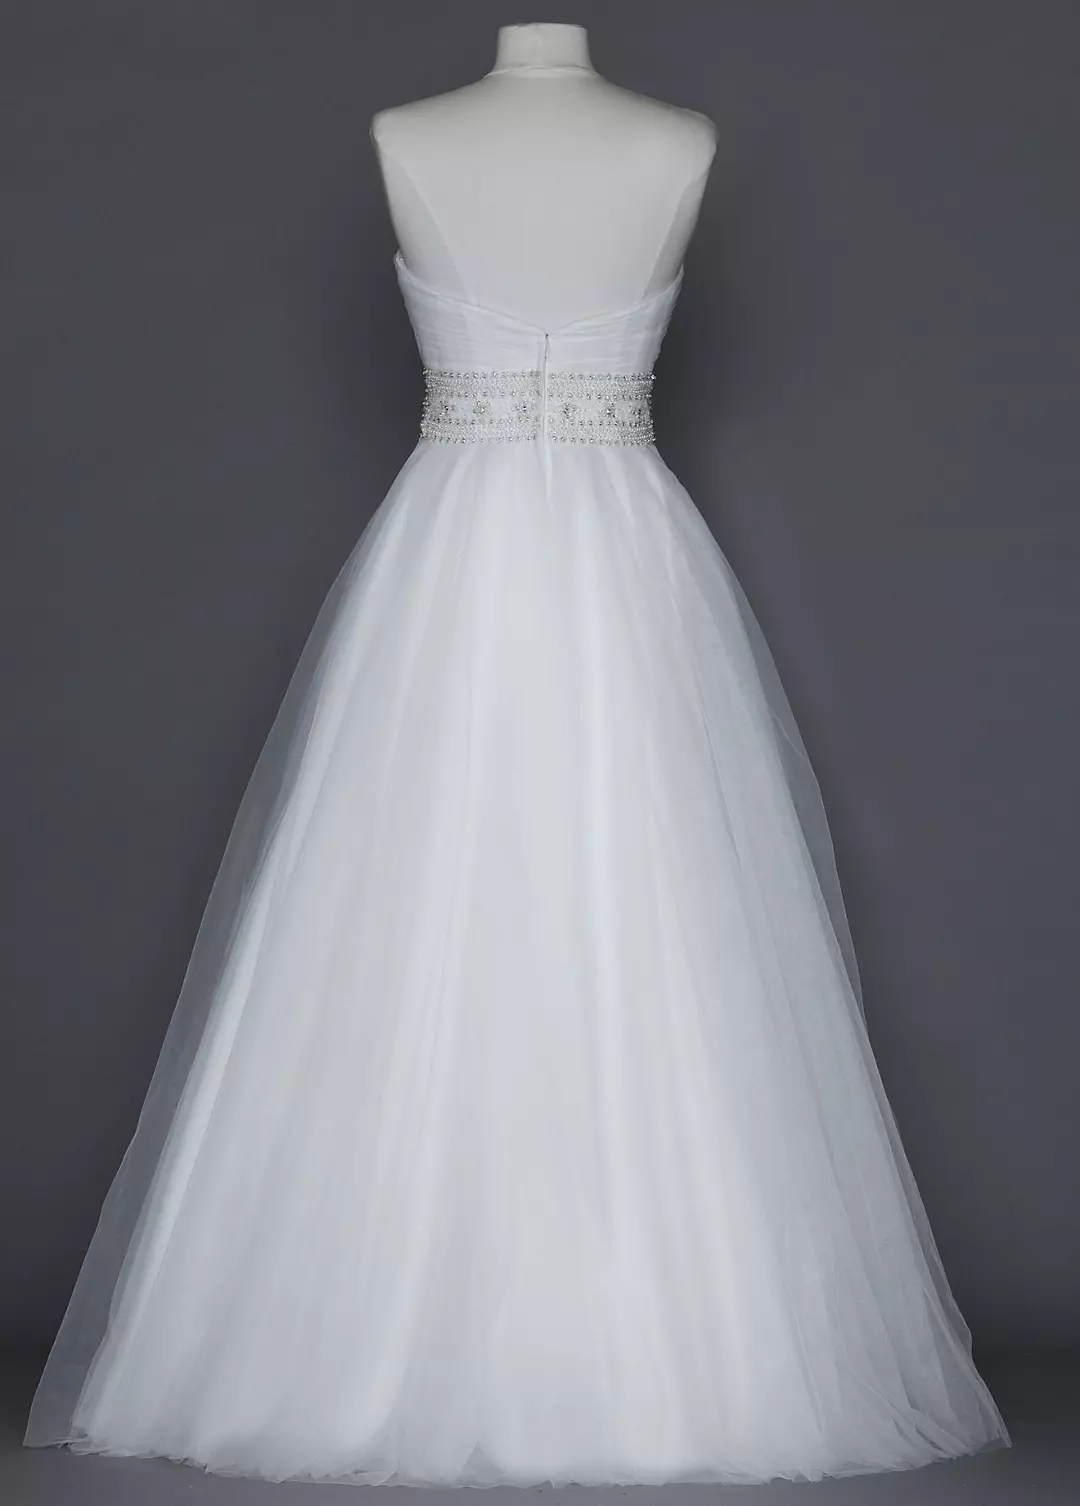 Strapless Tulle Ball Gown with Beaded Belt Image 2